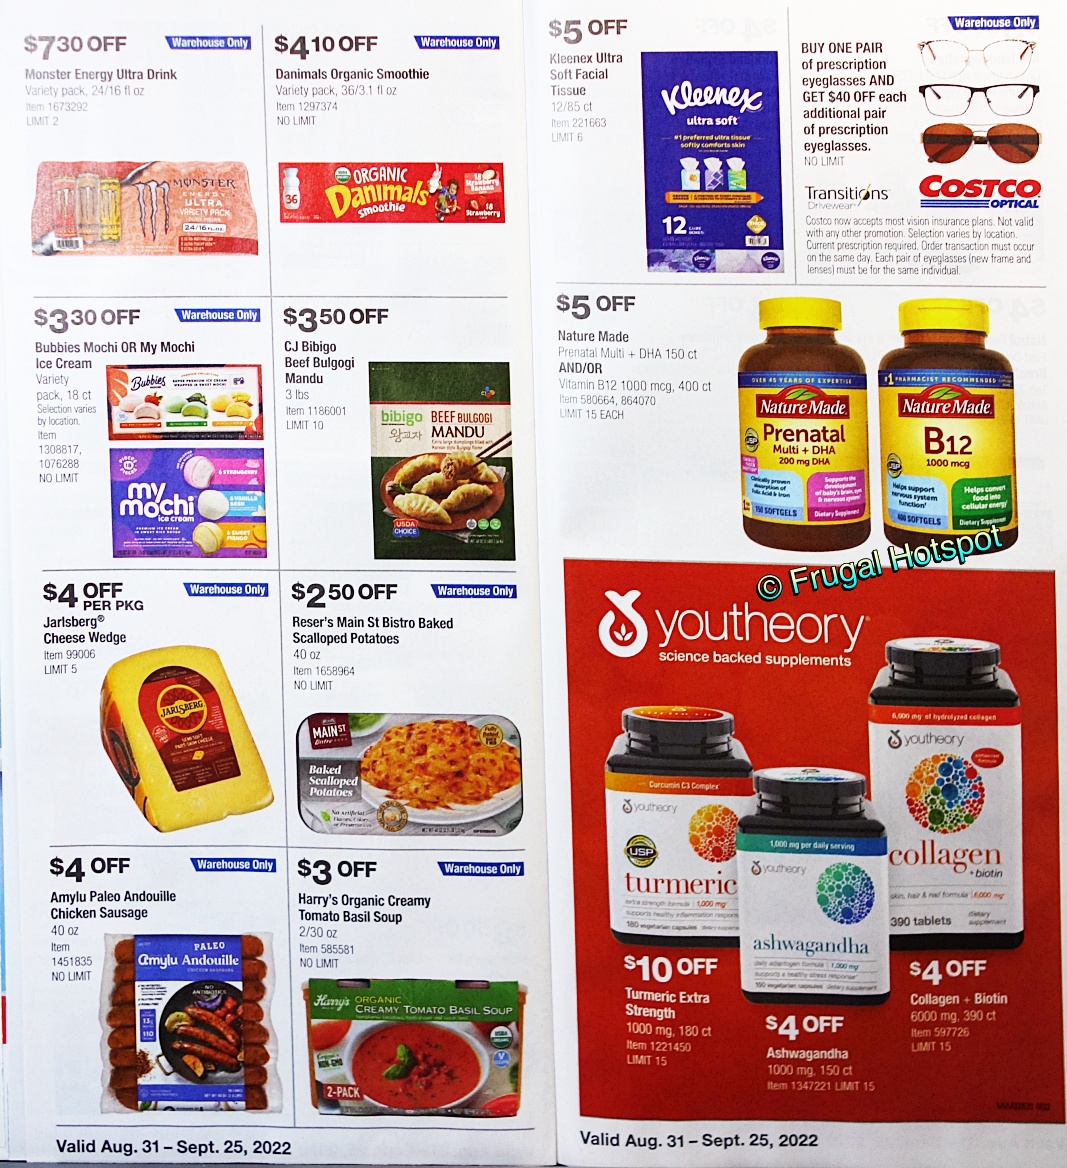 Costco Coupon Book SEPTEMBER 2022 | P 20 and 21